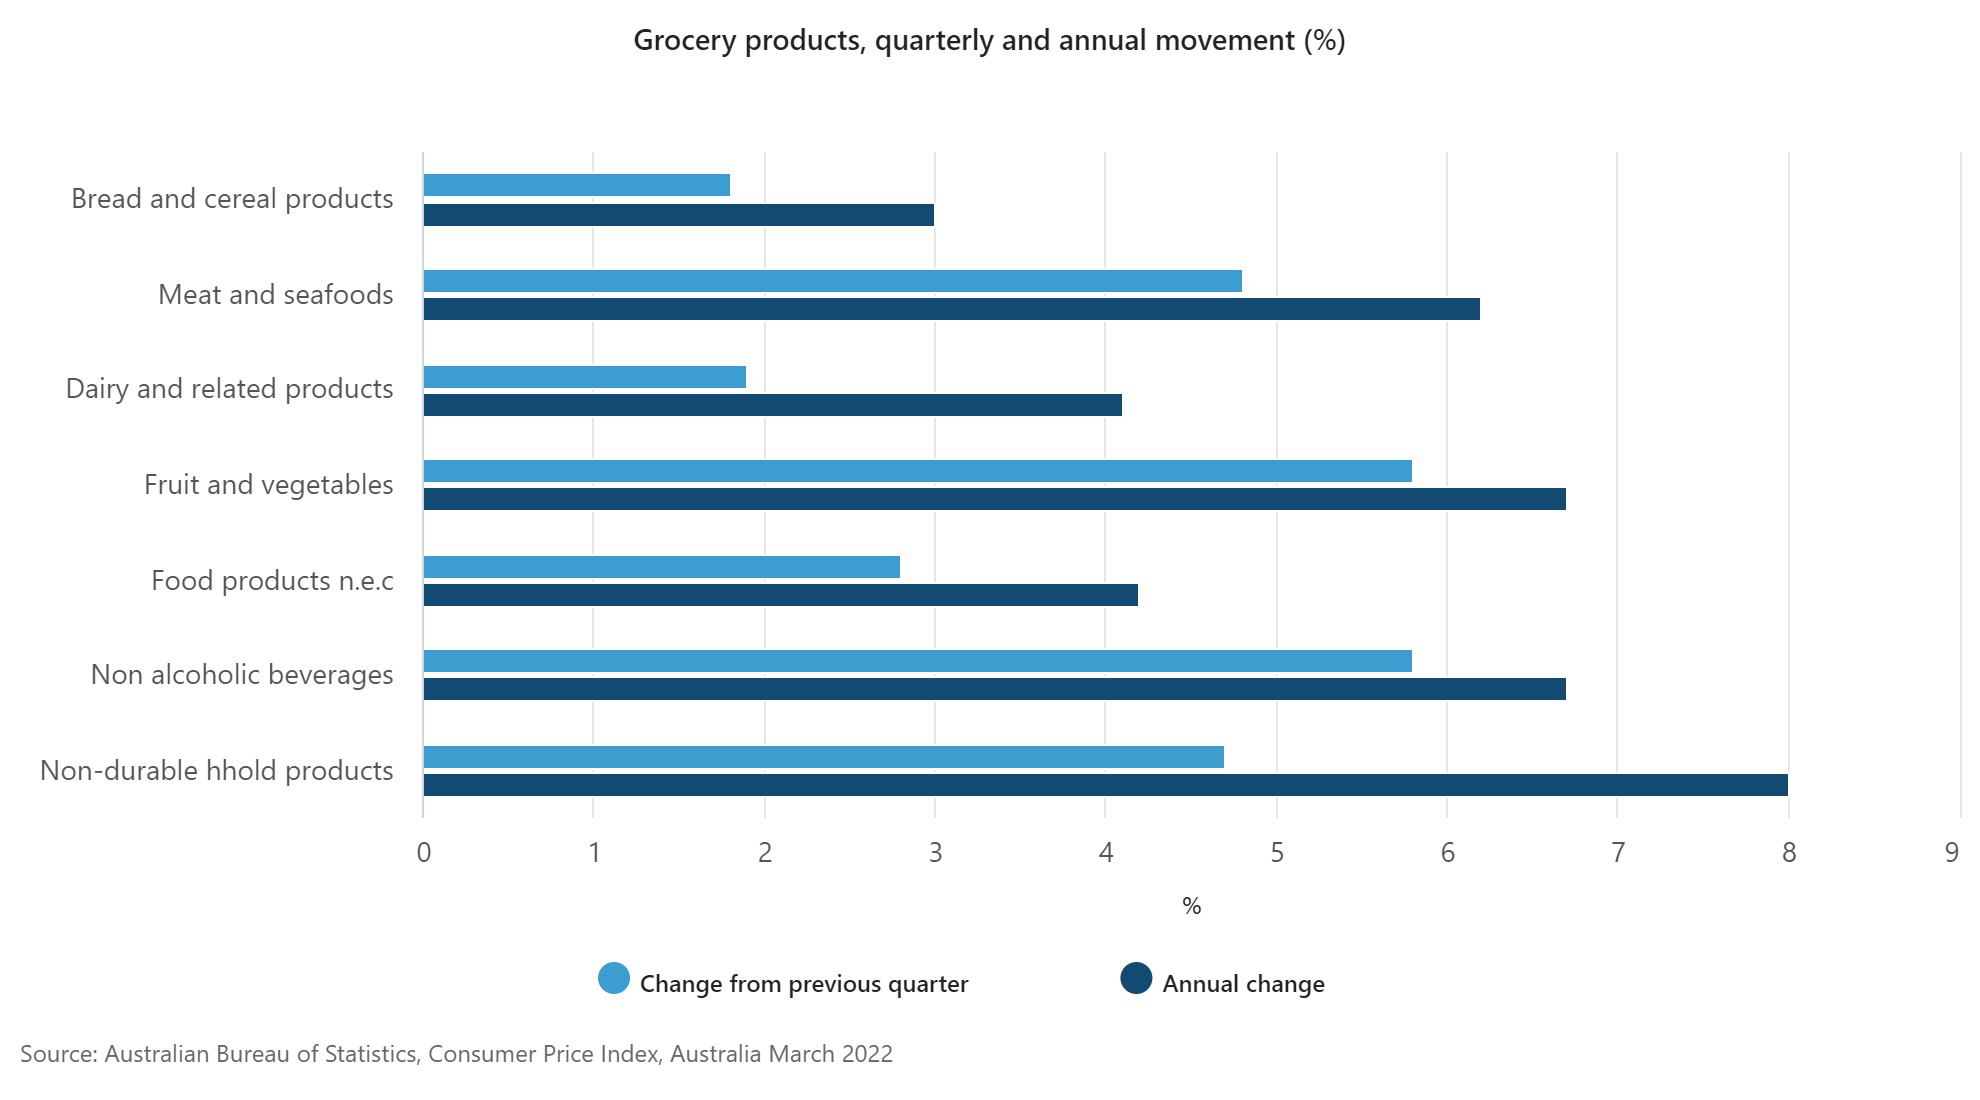 Quarterly and annual increases in grocery prices have been a major source of inflation.